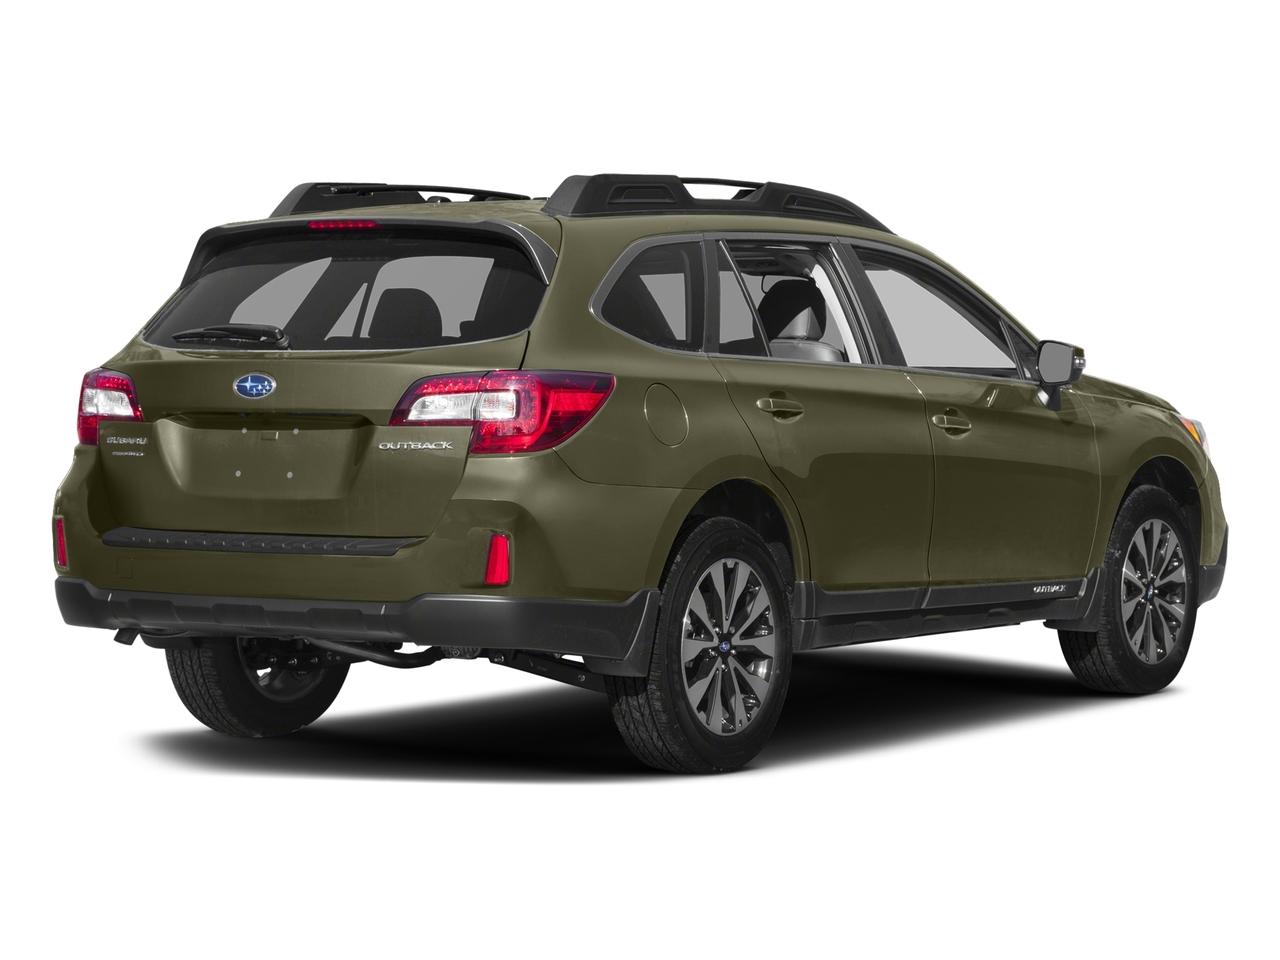 Wilderness Green Metallic 2017 Subaru Outback for Sale at